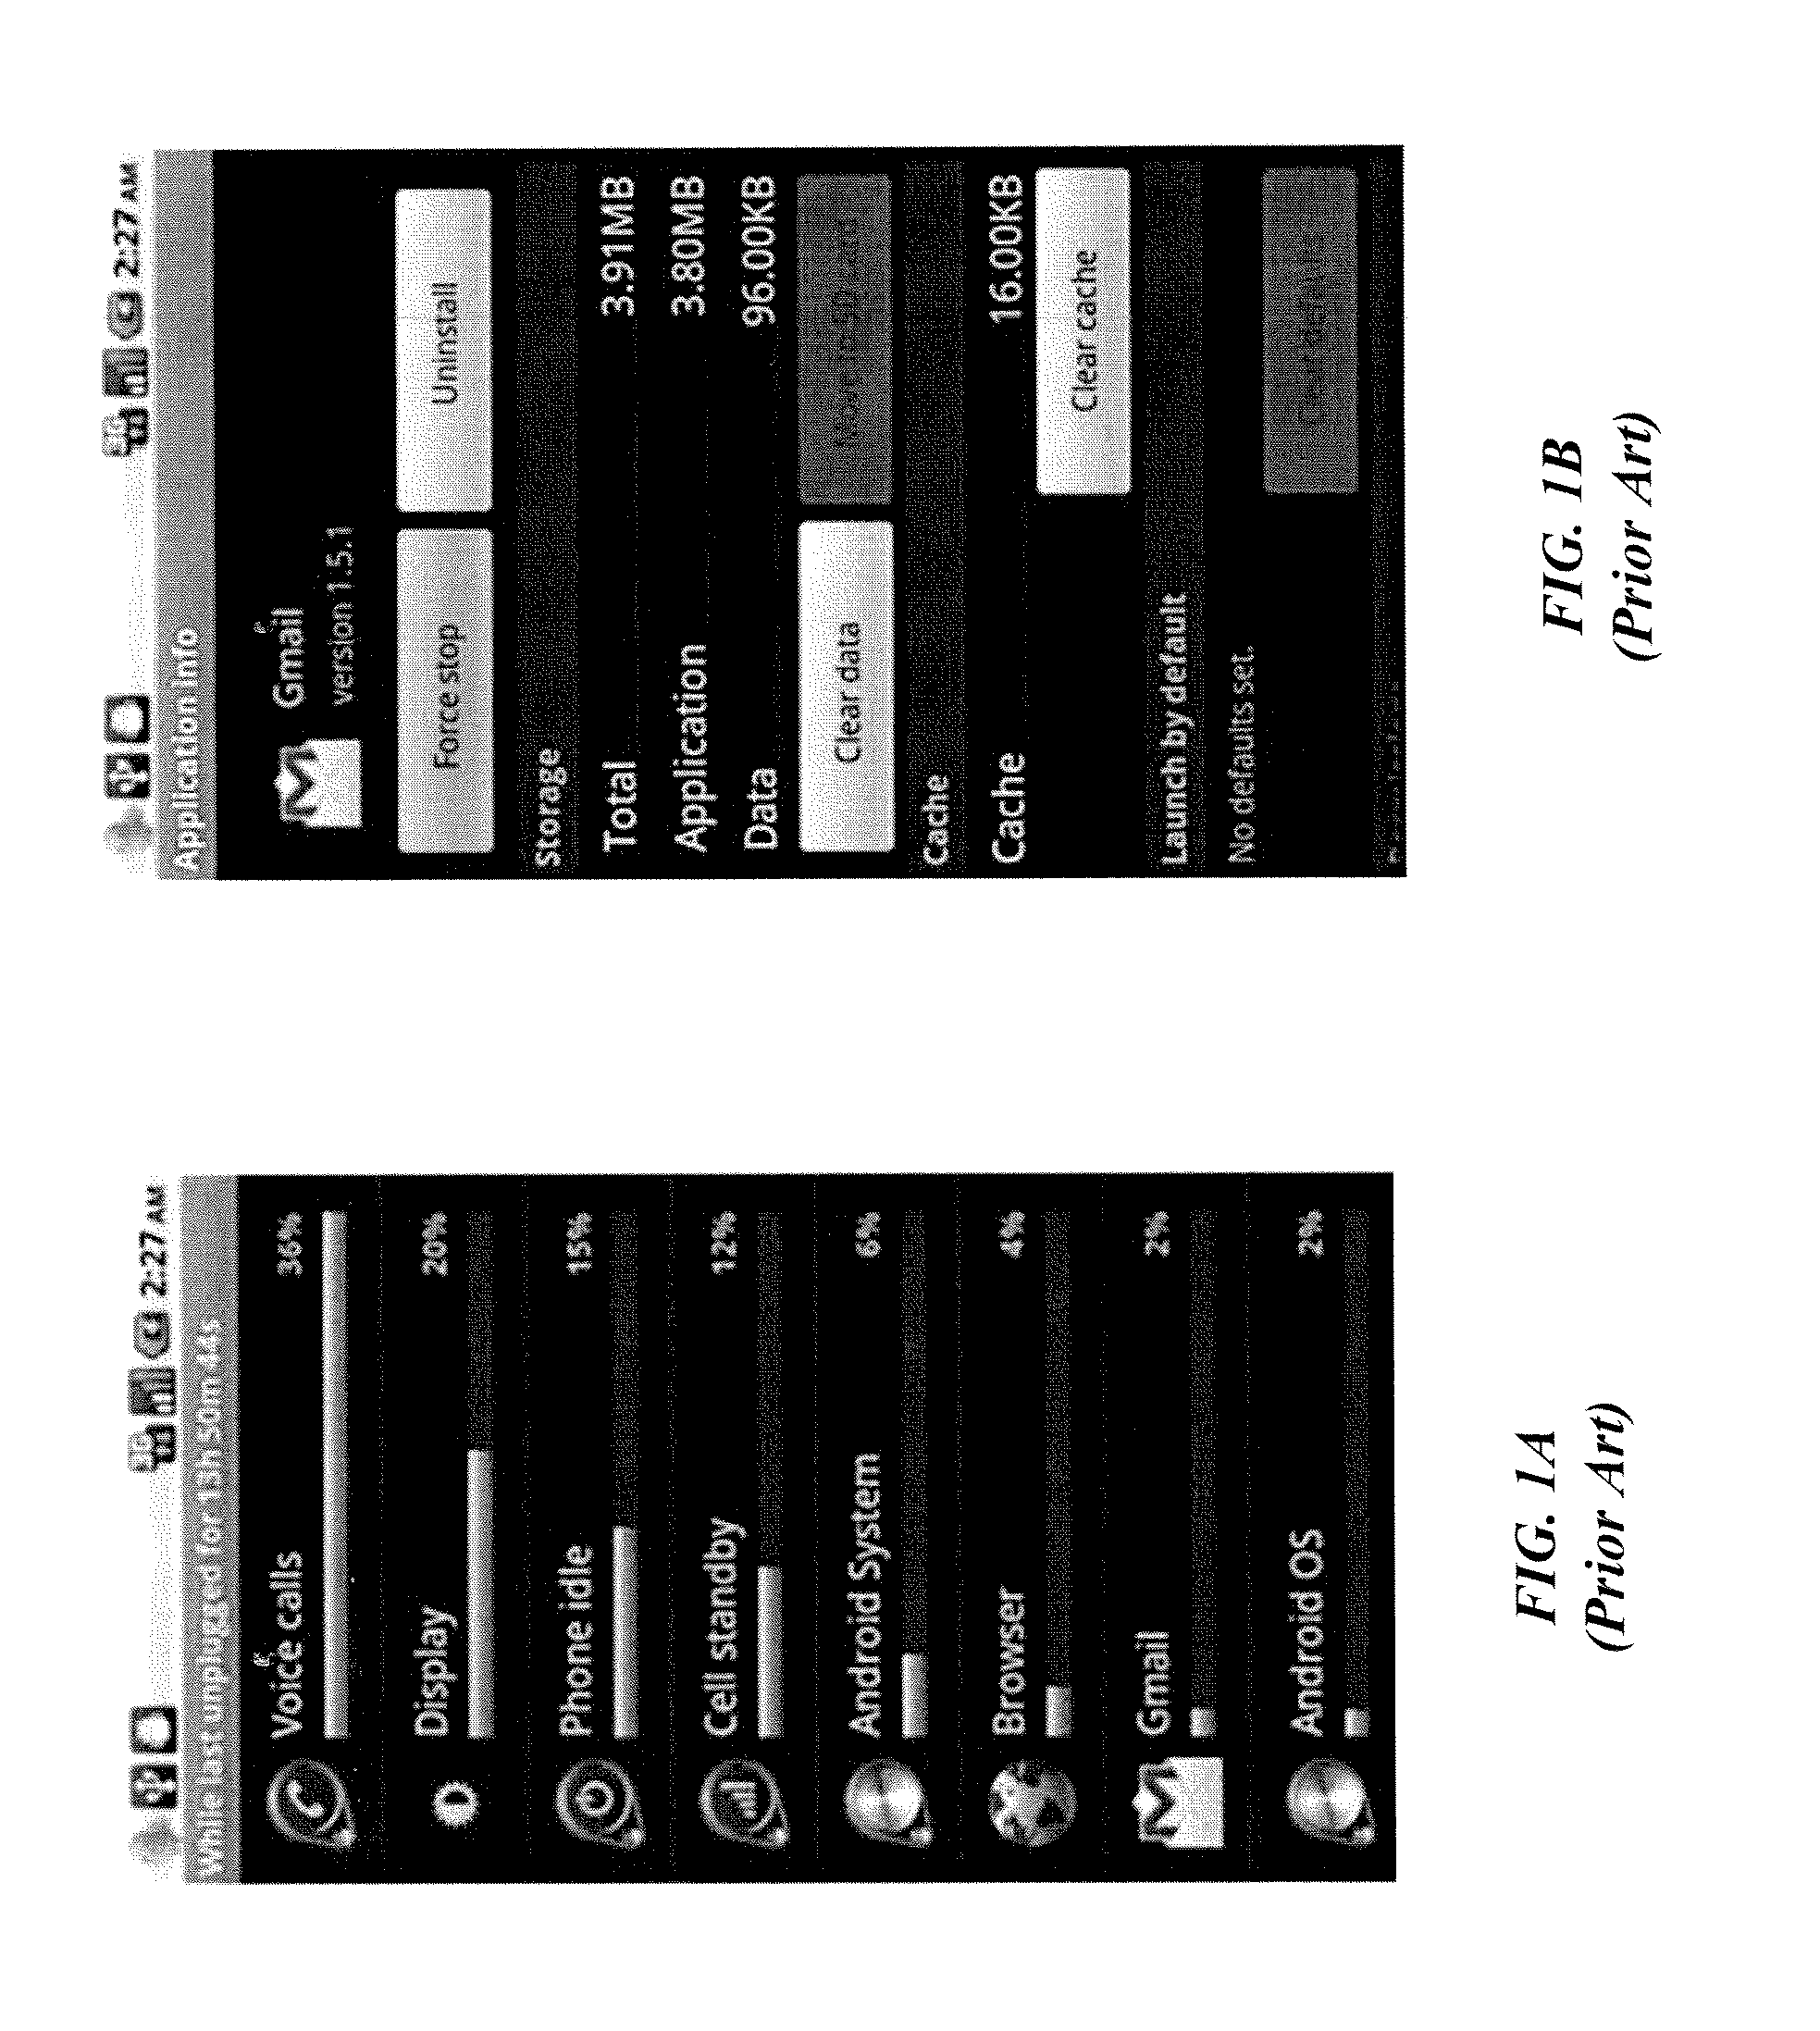 Dynamic battery saver for a mobile device